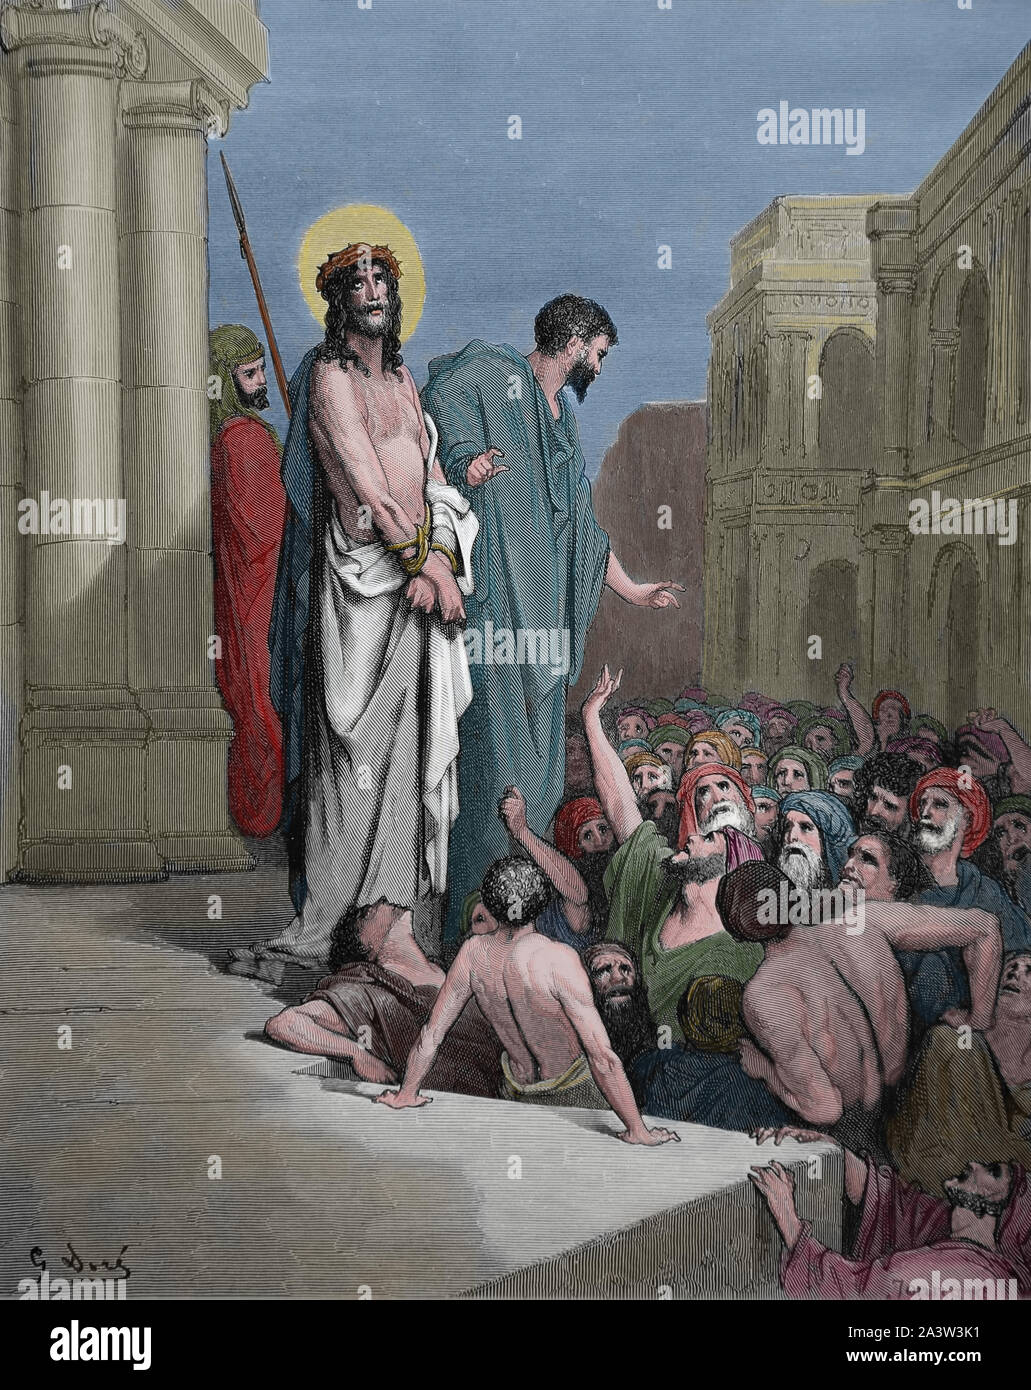 The Passion of Jesus. Christ presented to the people (John 19:15). Engraving. Bible Illustration by Gustave Dore. 19th century. Stock Photo